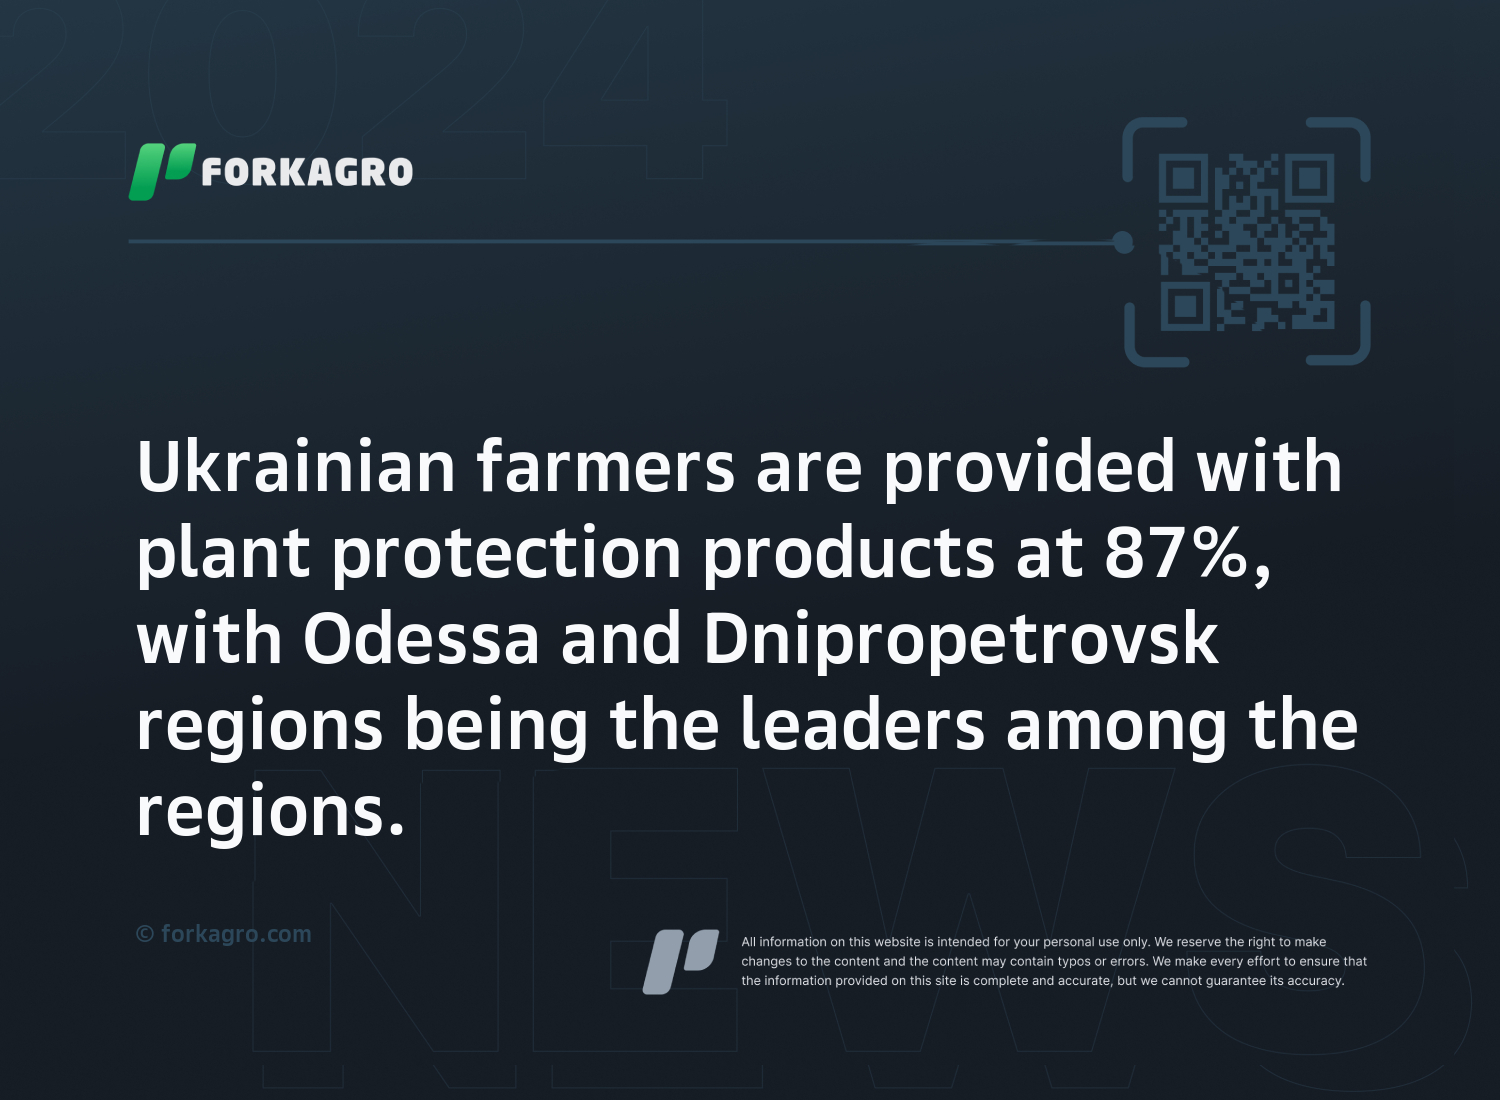 Ukrainian farmers are provided with plant protection products at 87%, with Odessa and Dnipropetrovsk regions being the leaders among the regions.